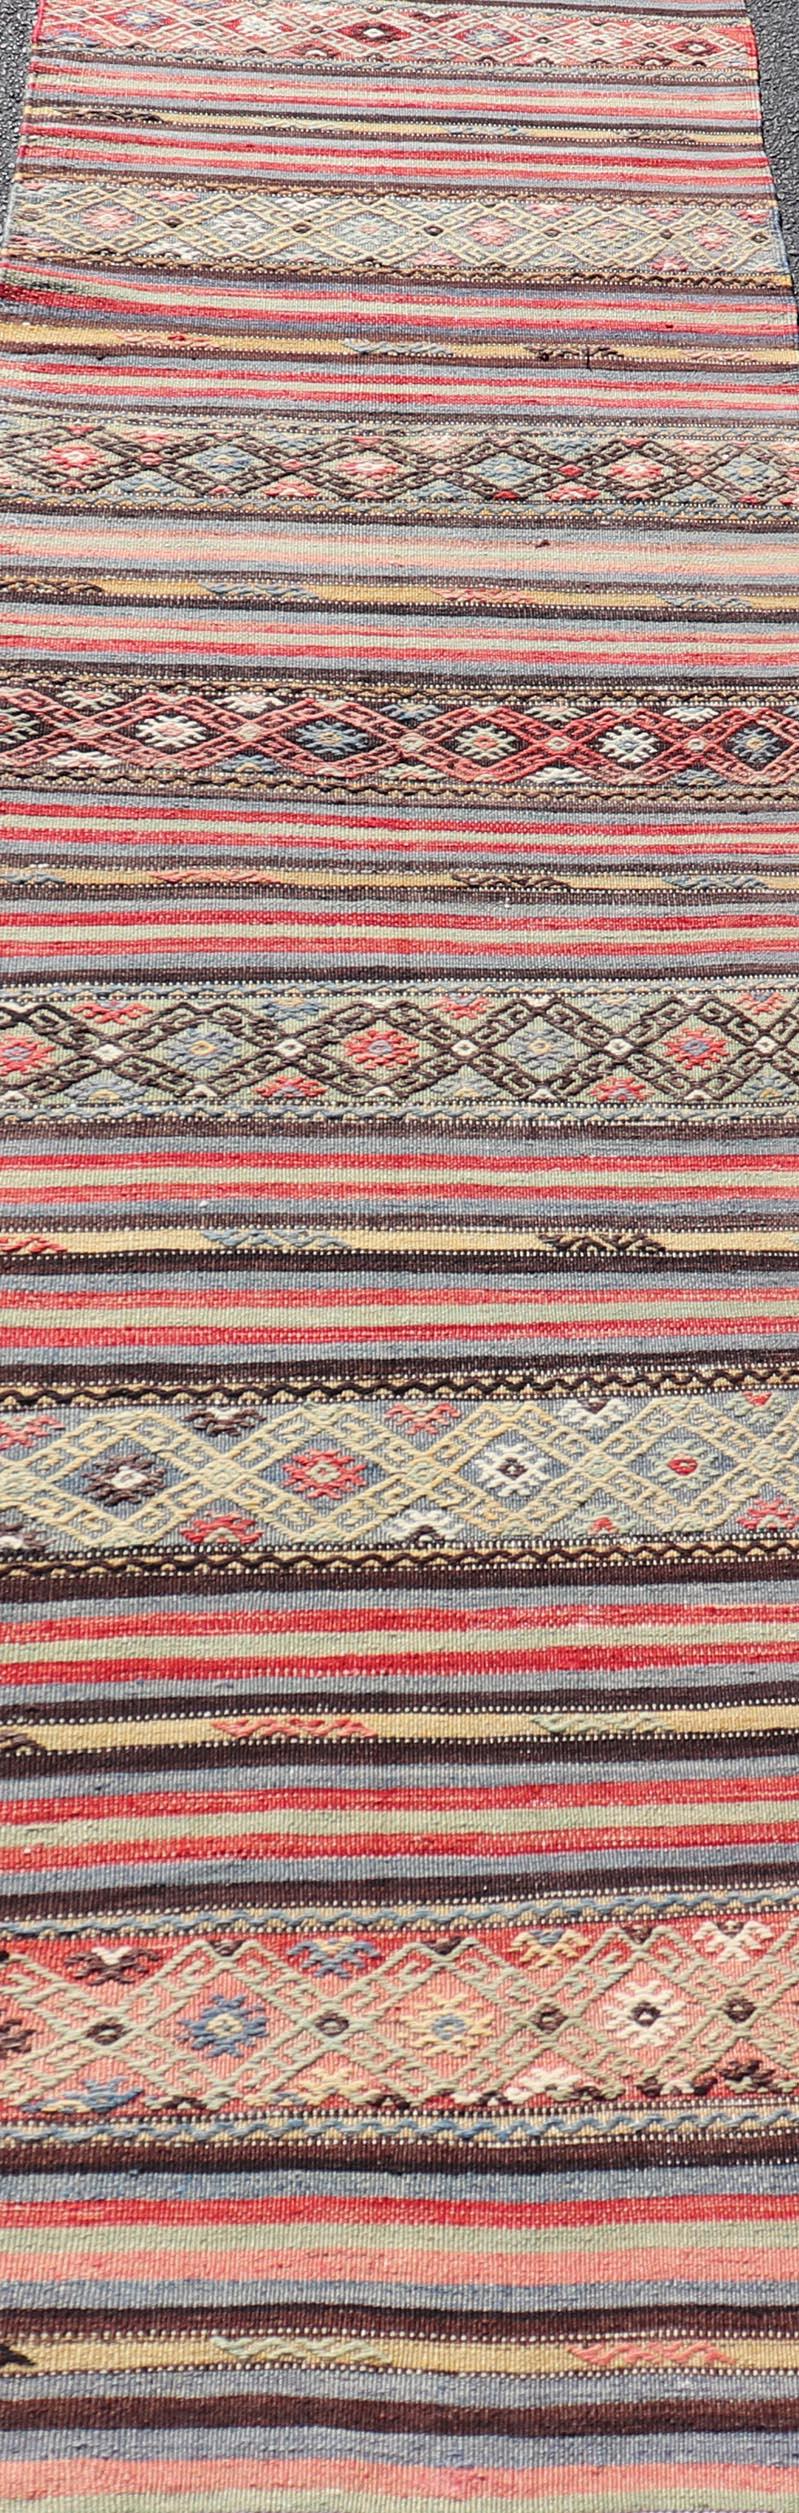 Vintage Turkish Kilim with Horizontal Stripes and Tribal Motifs in Bright Tones For Sale 2